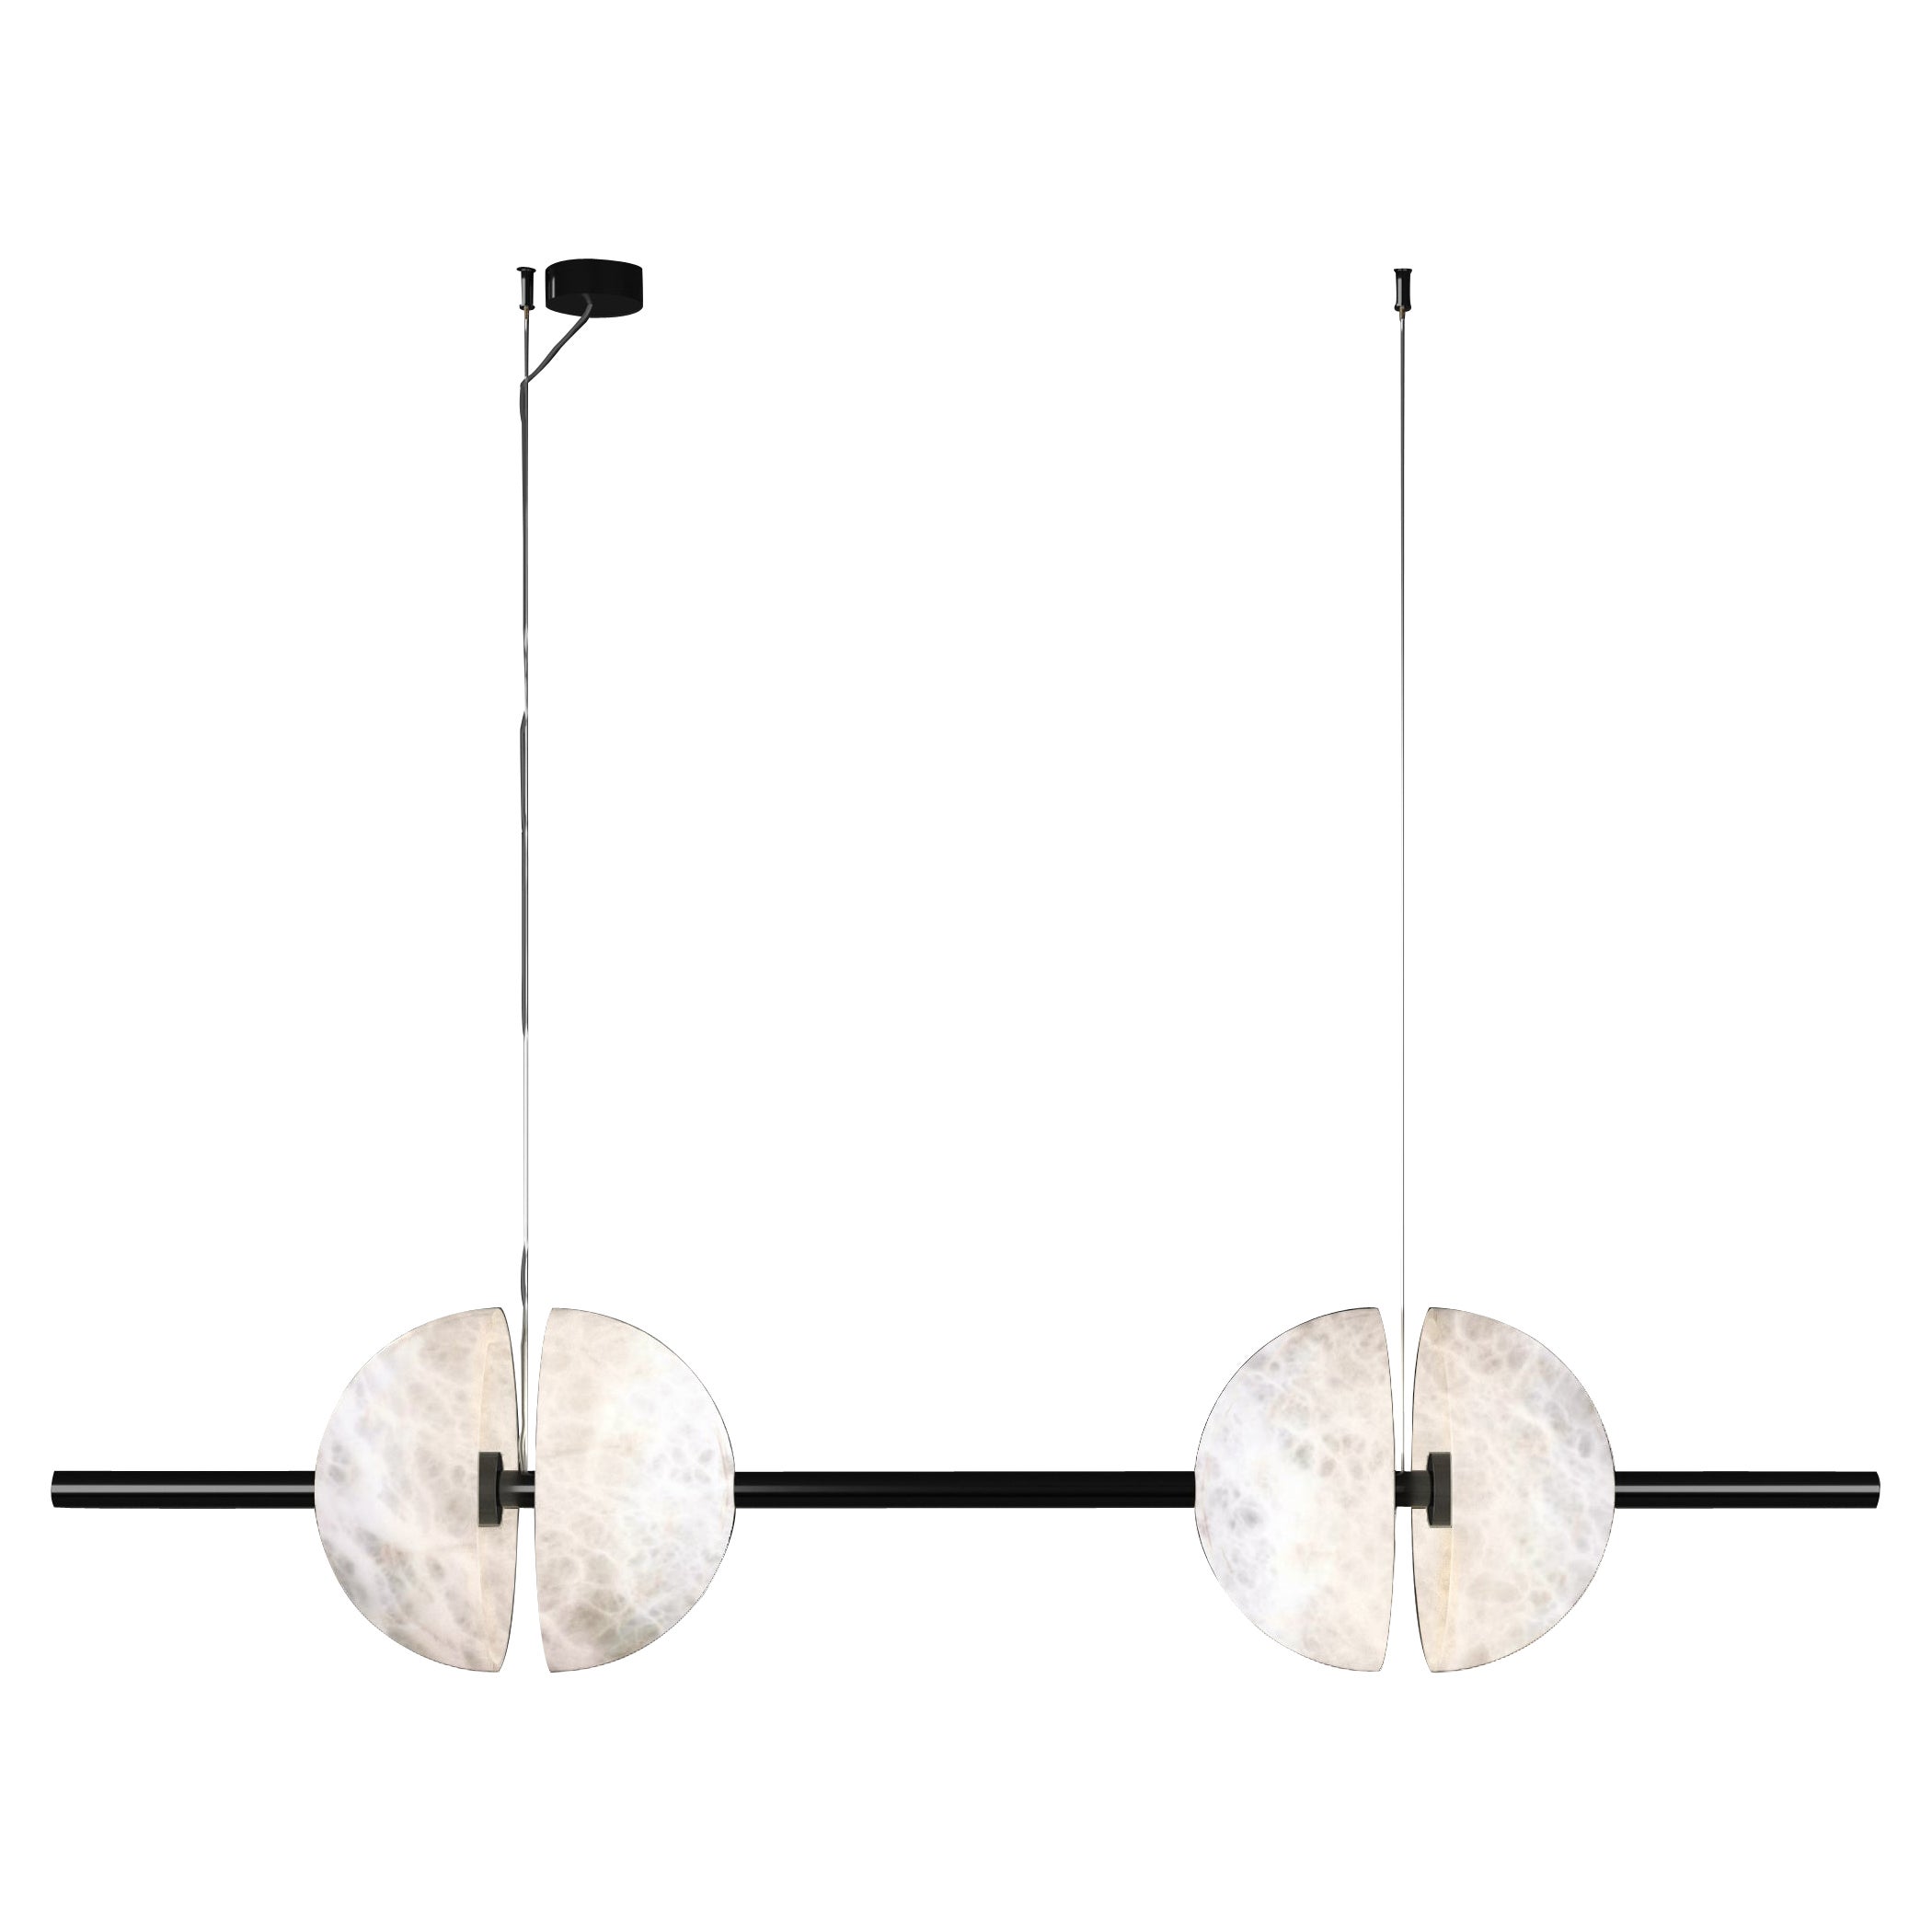 Ermes Shiny Black Metal And Alabaster Pendant Light 1 by Alabastro Italiano For Sale